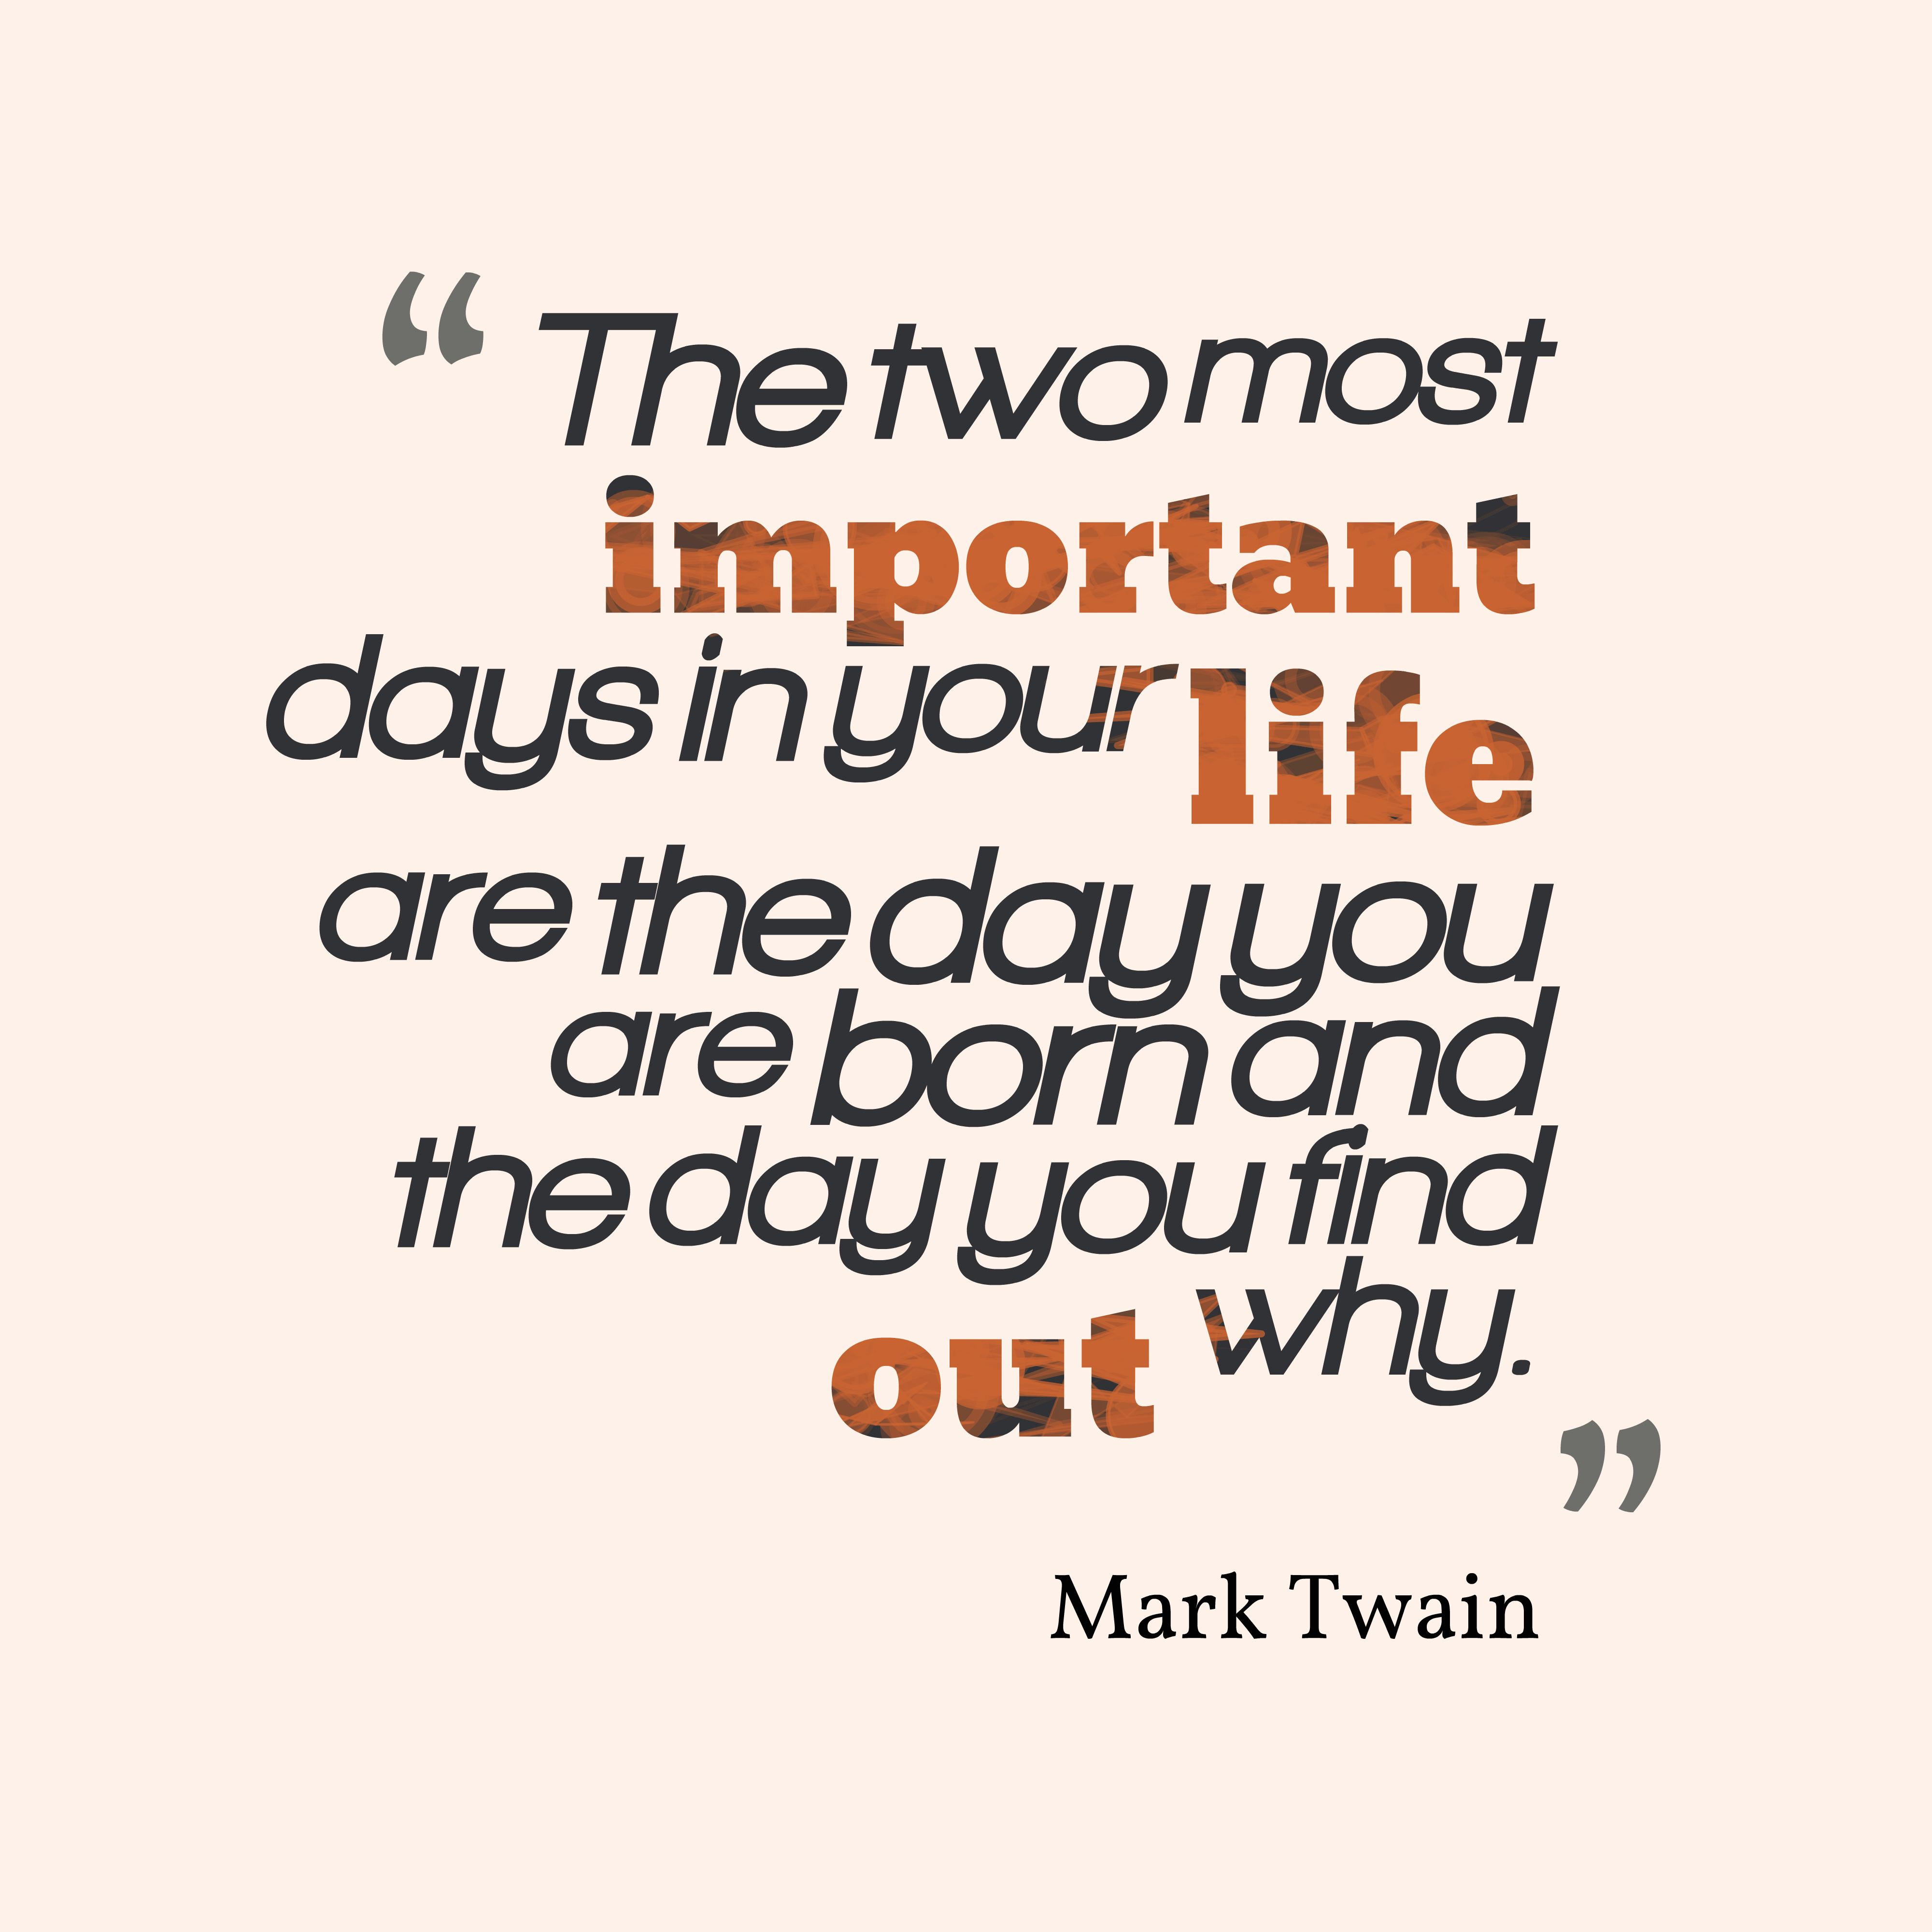 Mark Twain Quotes About Life 03